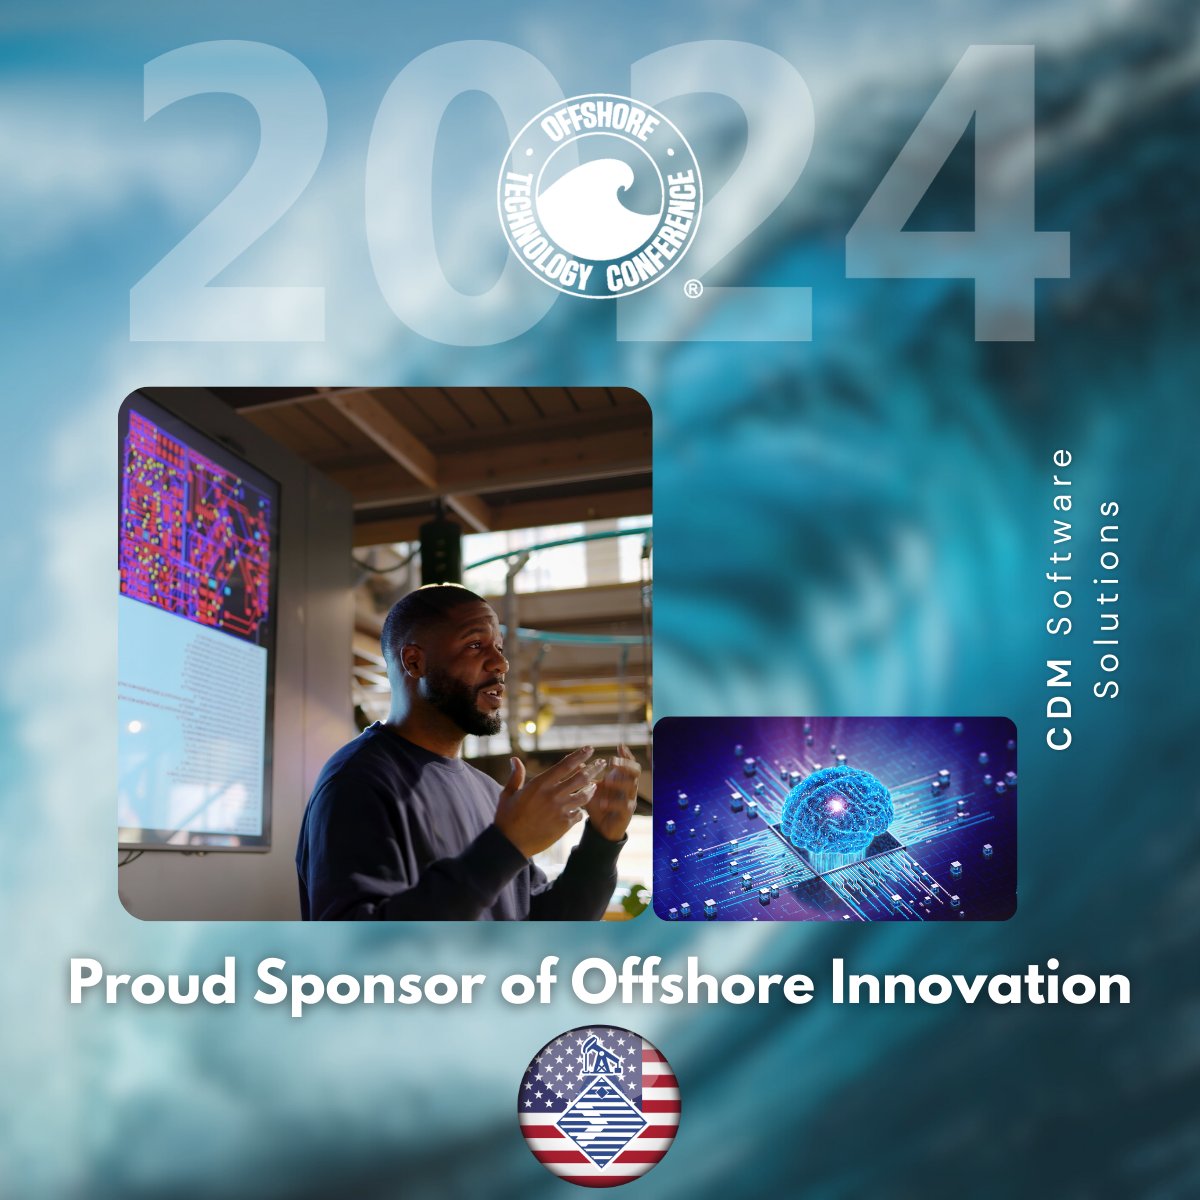 Today is the first day of the #OffshoreTechnologyConference! We're already out of the floor and are proud to sponsor this hub of #innovation.

#offshore #oilgas #oilindustry #permianbasin #oilpatch